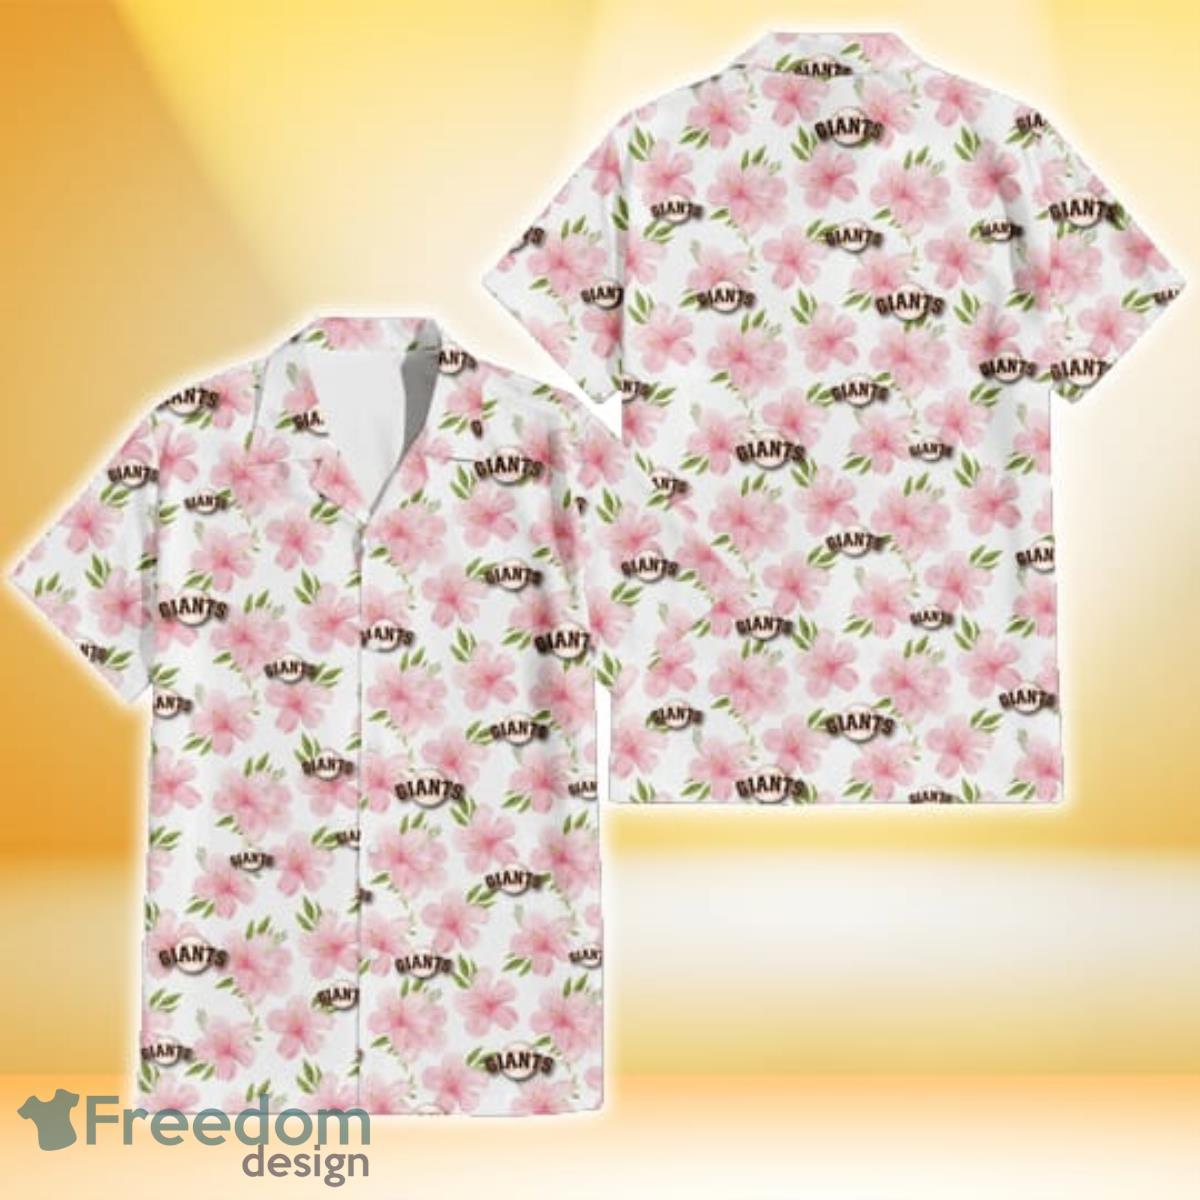 San Francisco Giants Logo And Red Pink White Hibiscus 3D Hawaiian Shirt For  Fans - Banantees